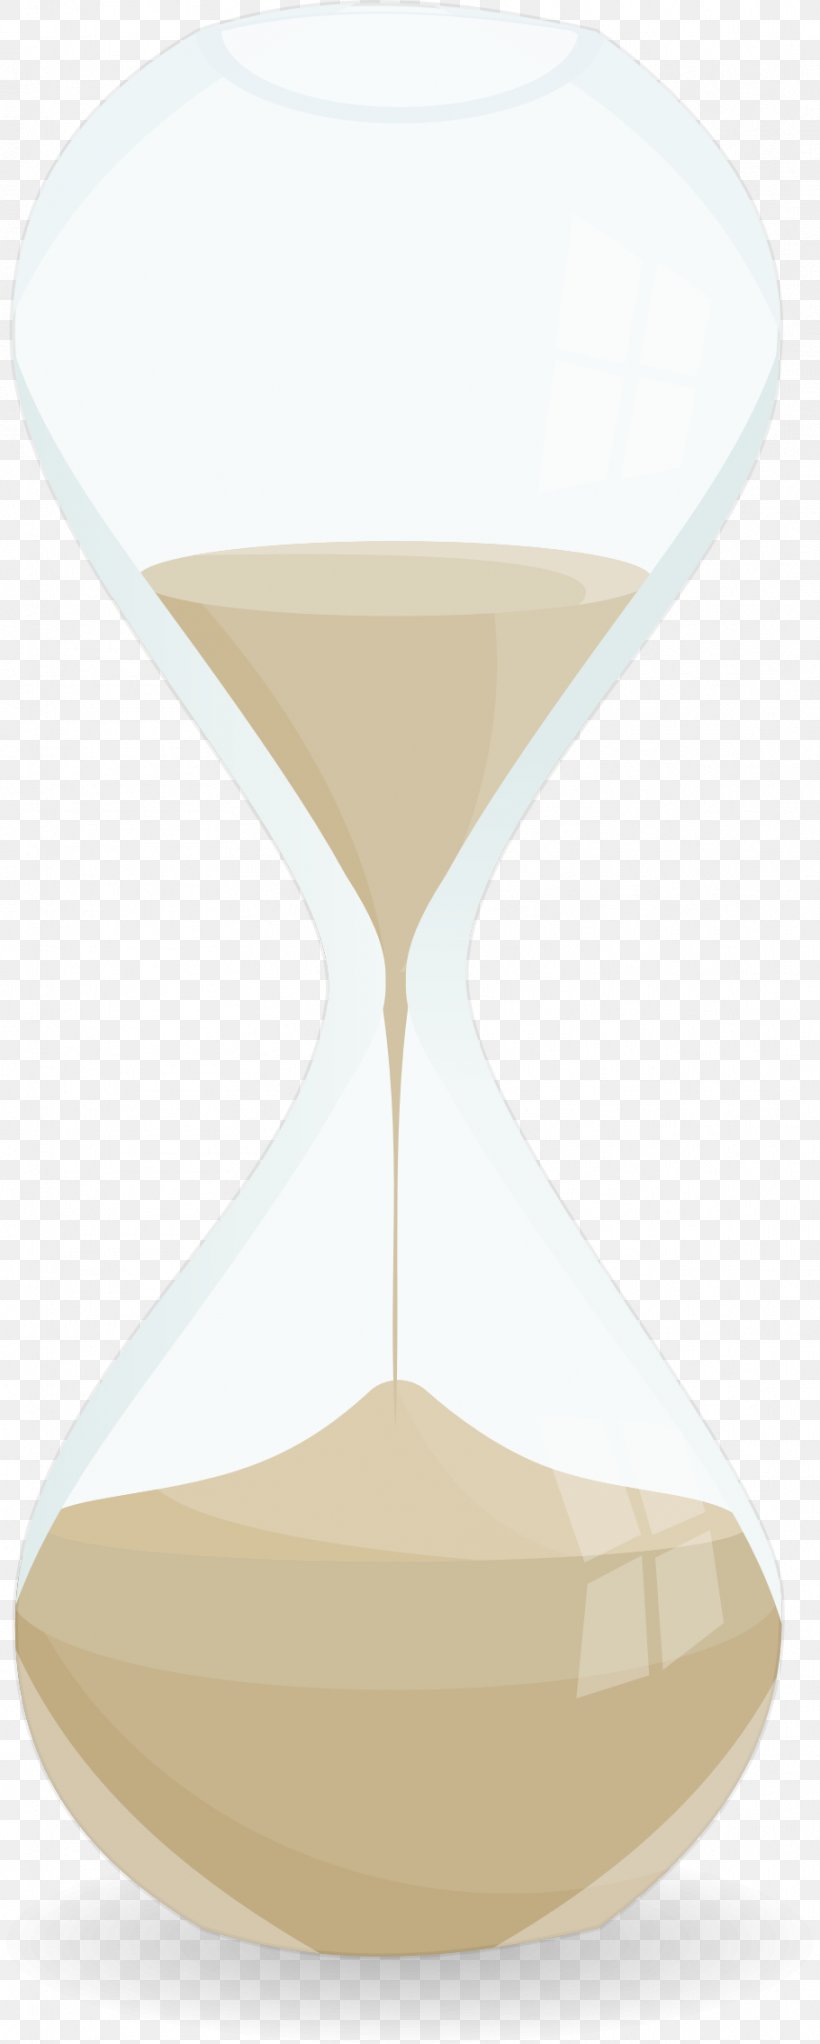 Hourglass Clock Timer Clip Art, PNG, 911x2271px, Hourglass, Candle Clock, Clock, Egg Timer, Hourglass Figure Download Free